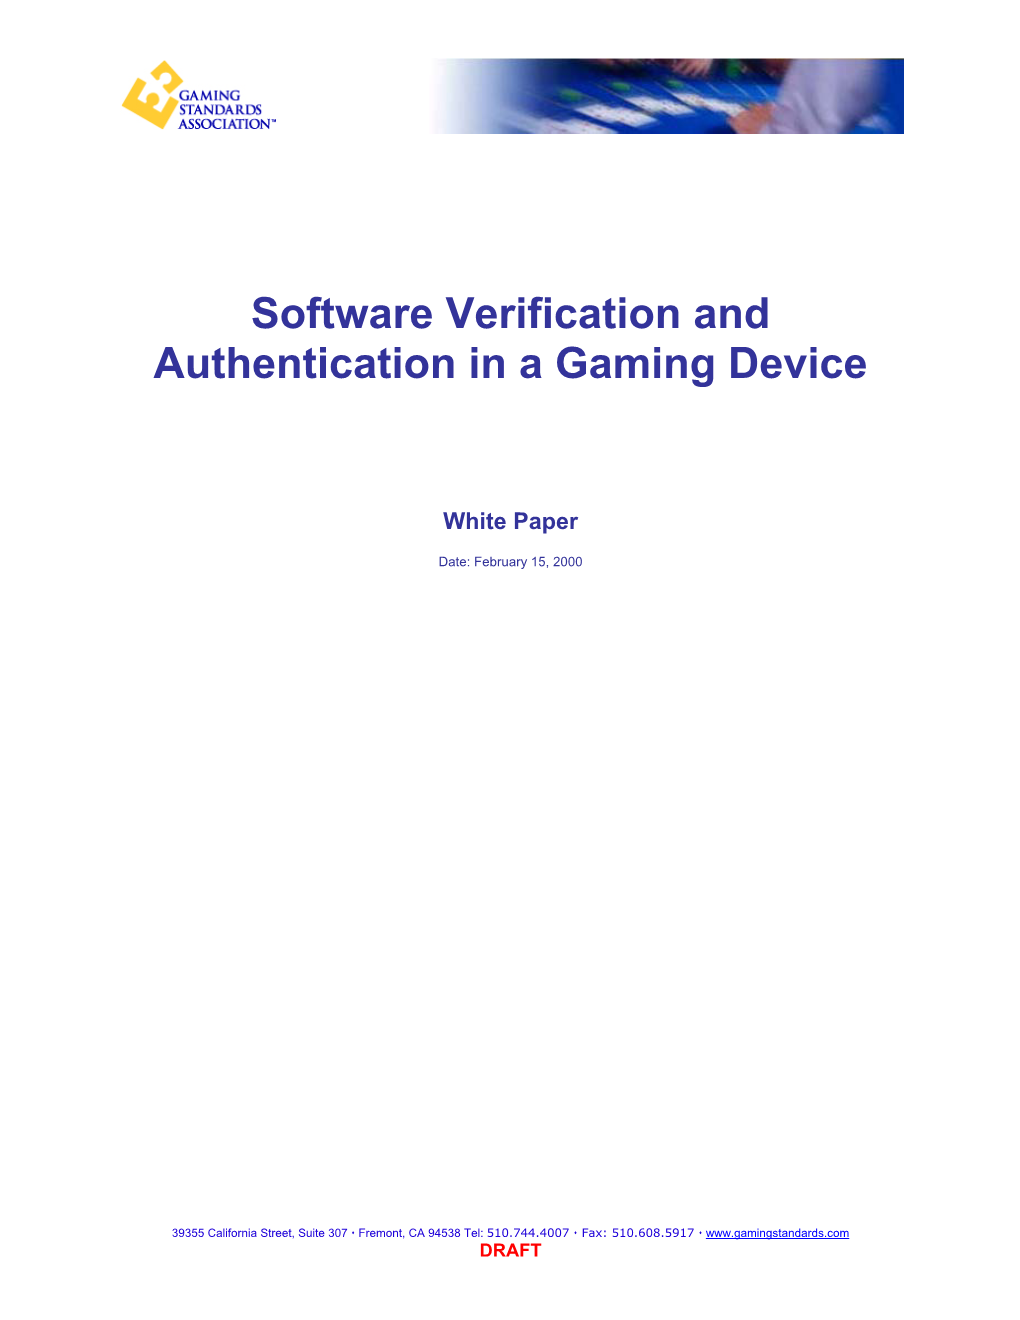 Software Verification and Authentication in a Gaming Device